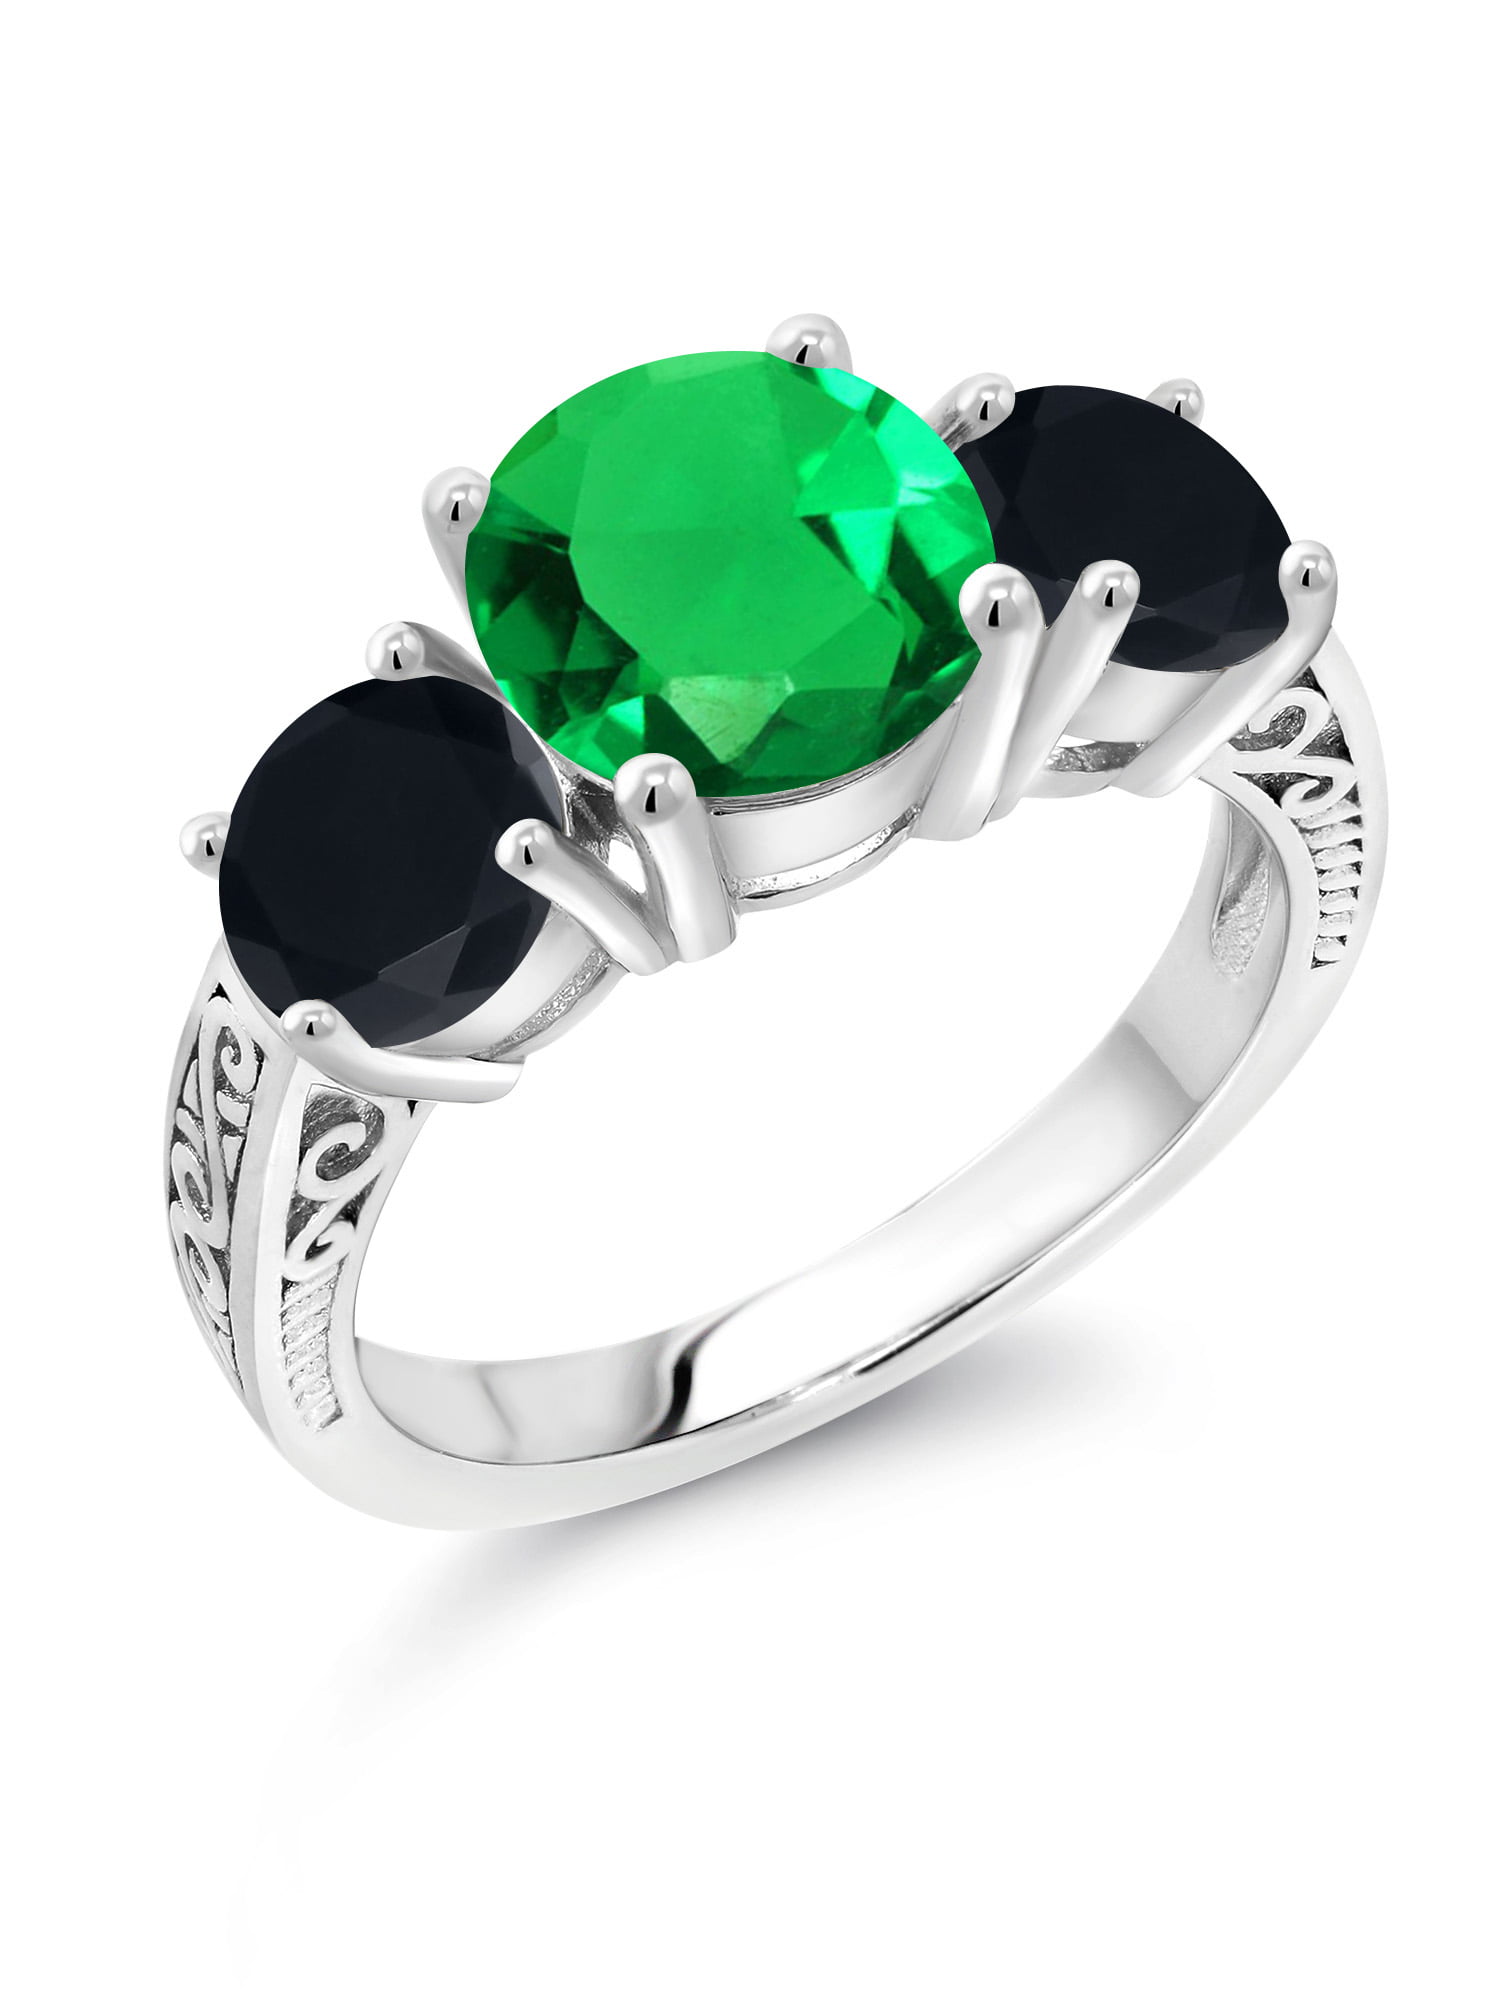 Solid 925 Sterling silver Green emerald May Birthstone wedding Ring Size 5